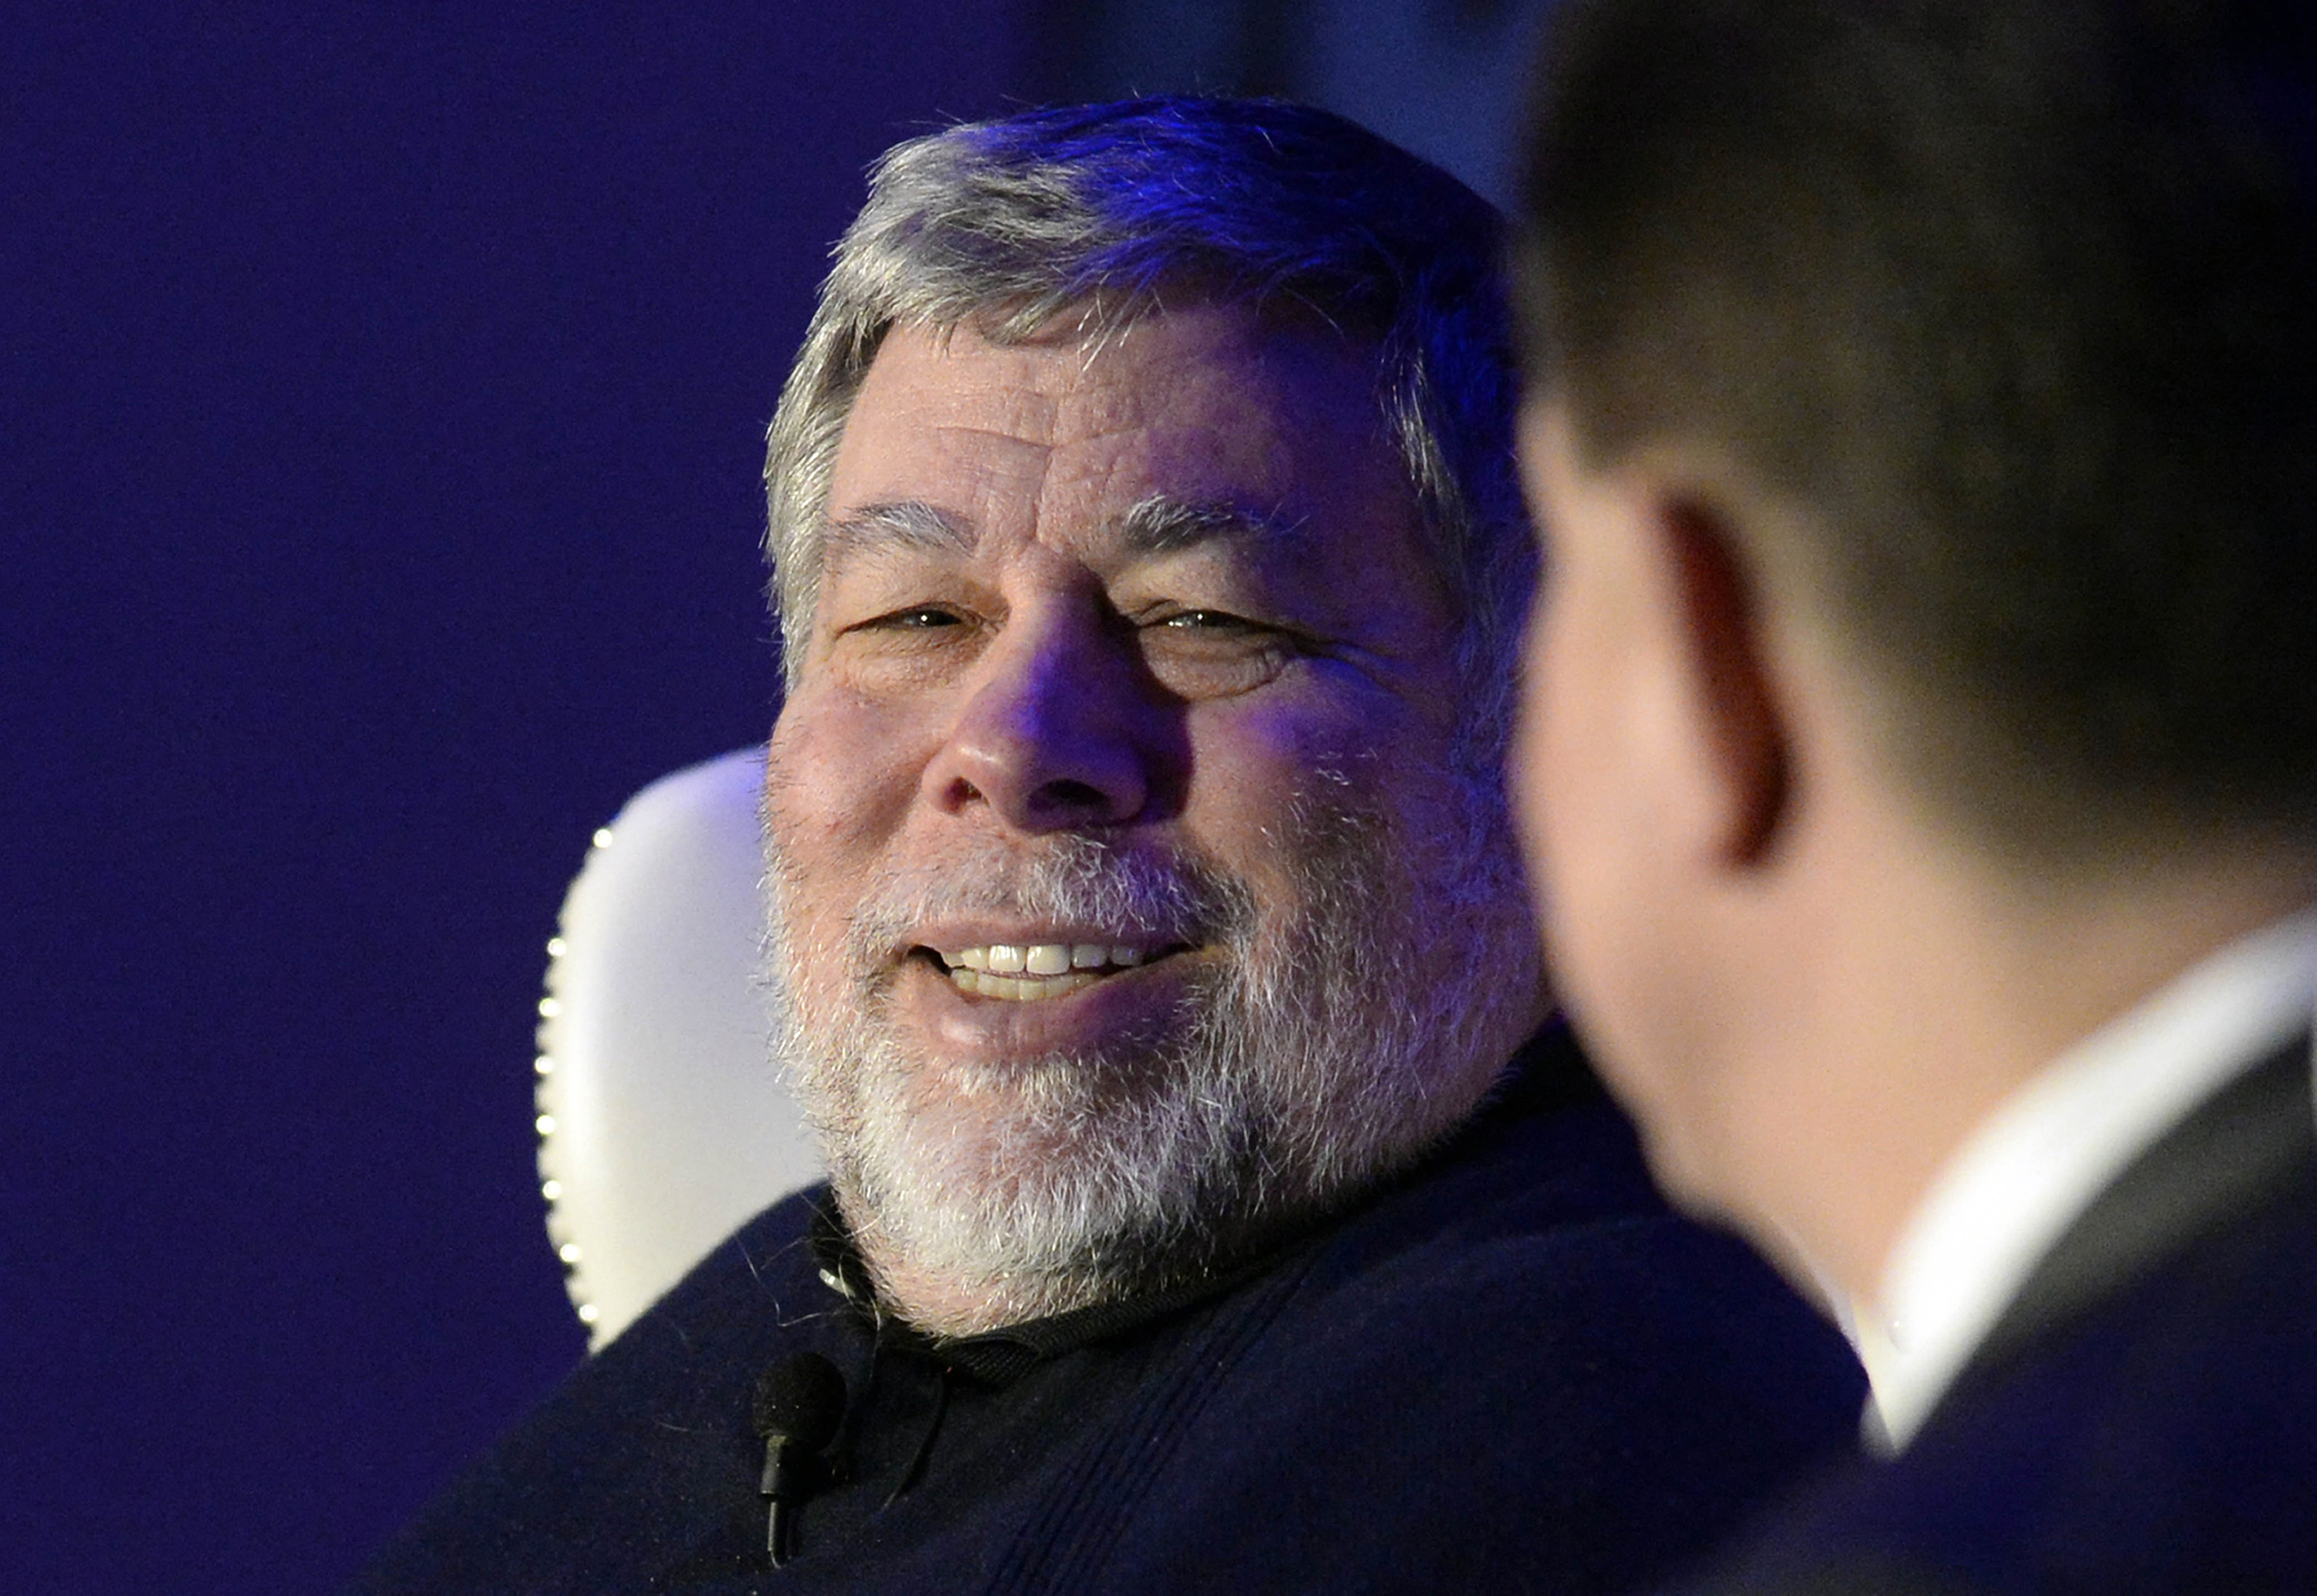 Apple co-founder Steve Wozniak, left, smiles as he answers a question from moderator Mike McGuire during the keynote luncheon of the 9th annual Southeast Venture Conference and Digital Summit Charlotte at the Le Meridien Charlotte on Wednesday, April 1, 2015, in Charlotte, N.C. (Charlotte Observer&mdash;TNS via Getty Images)